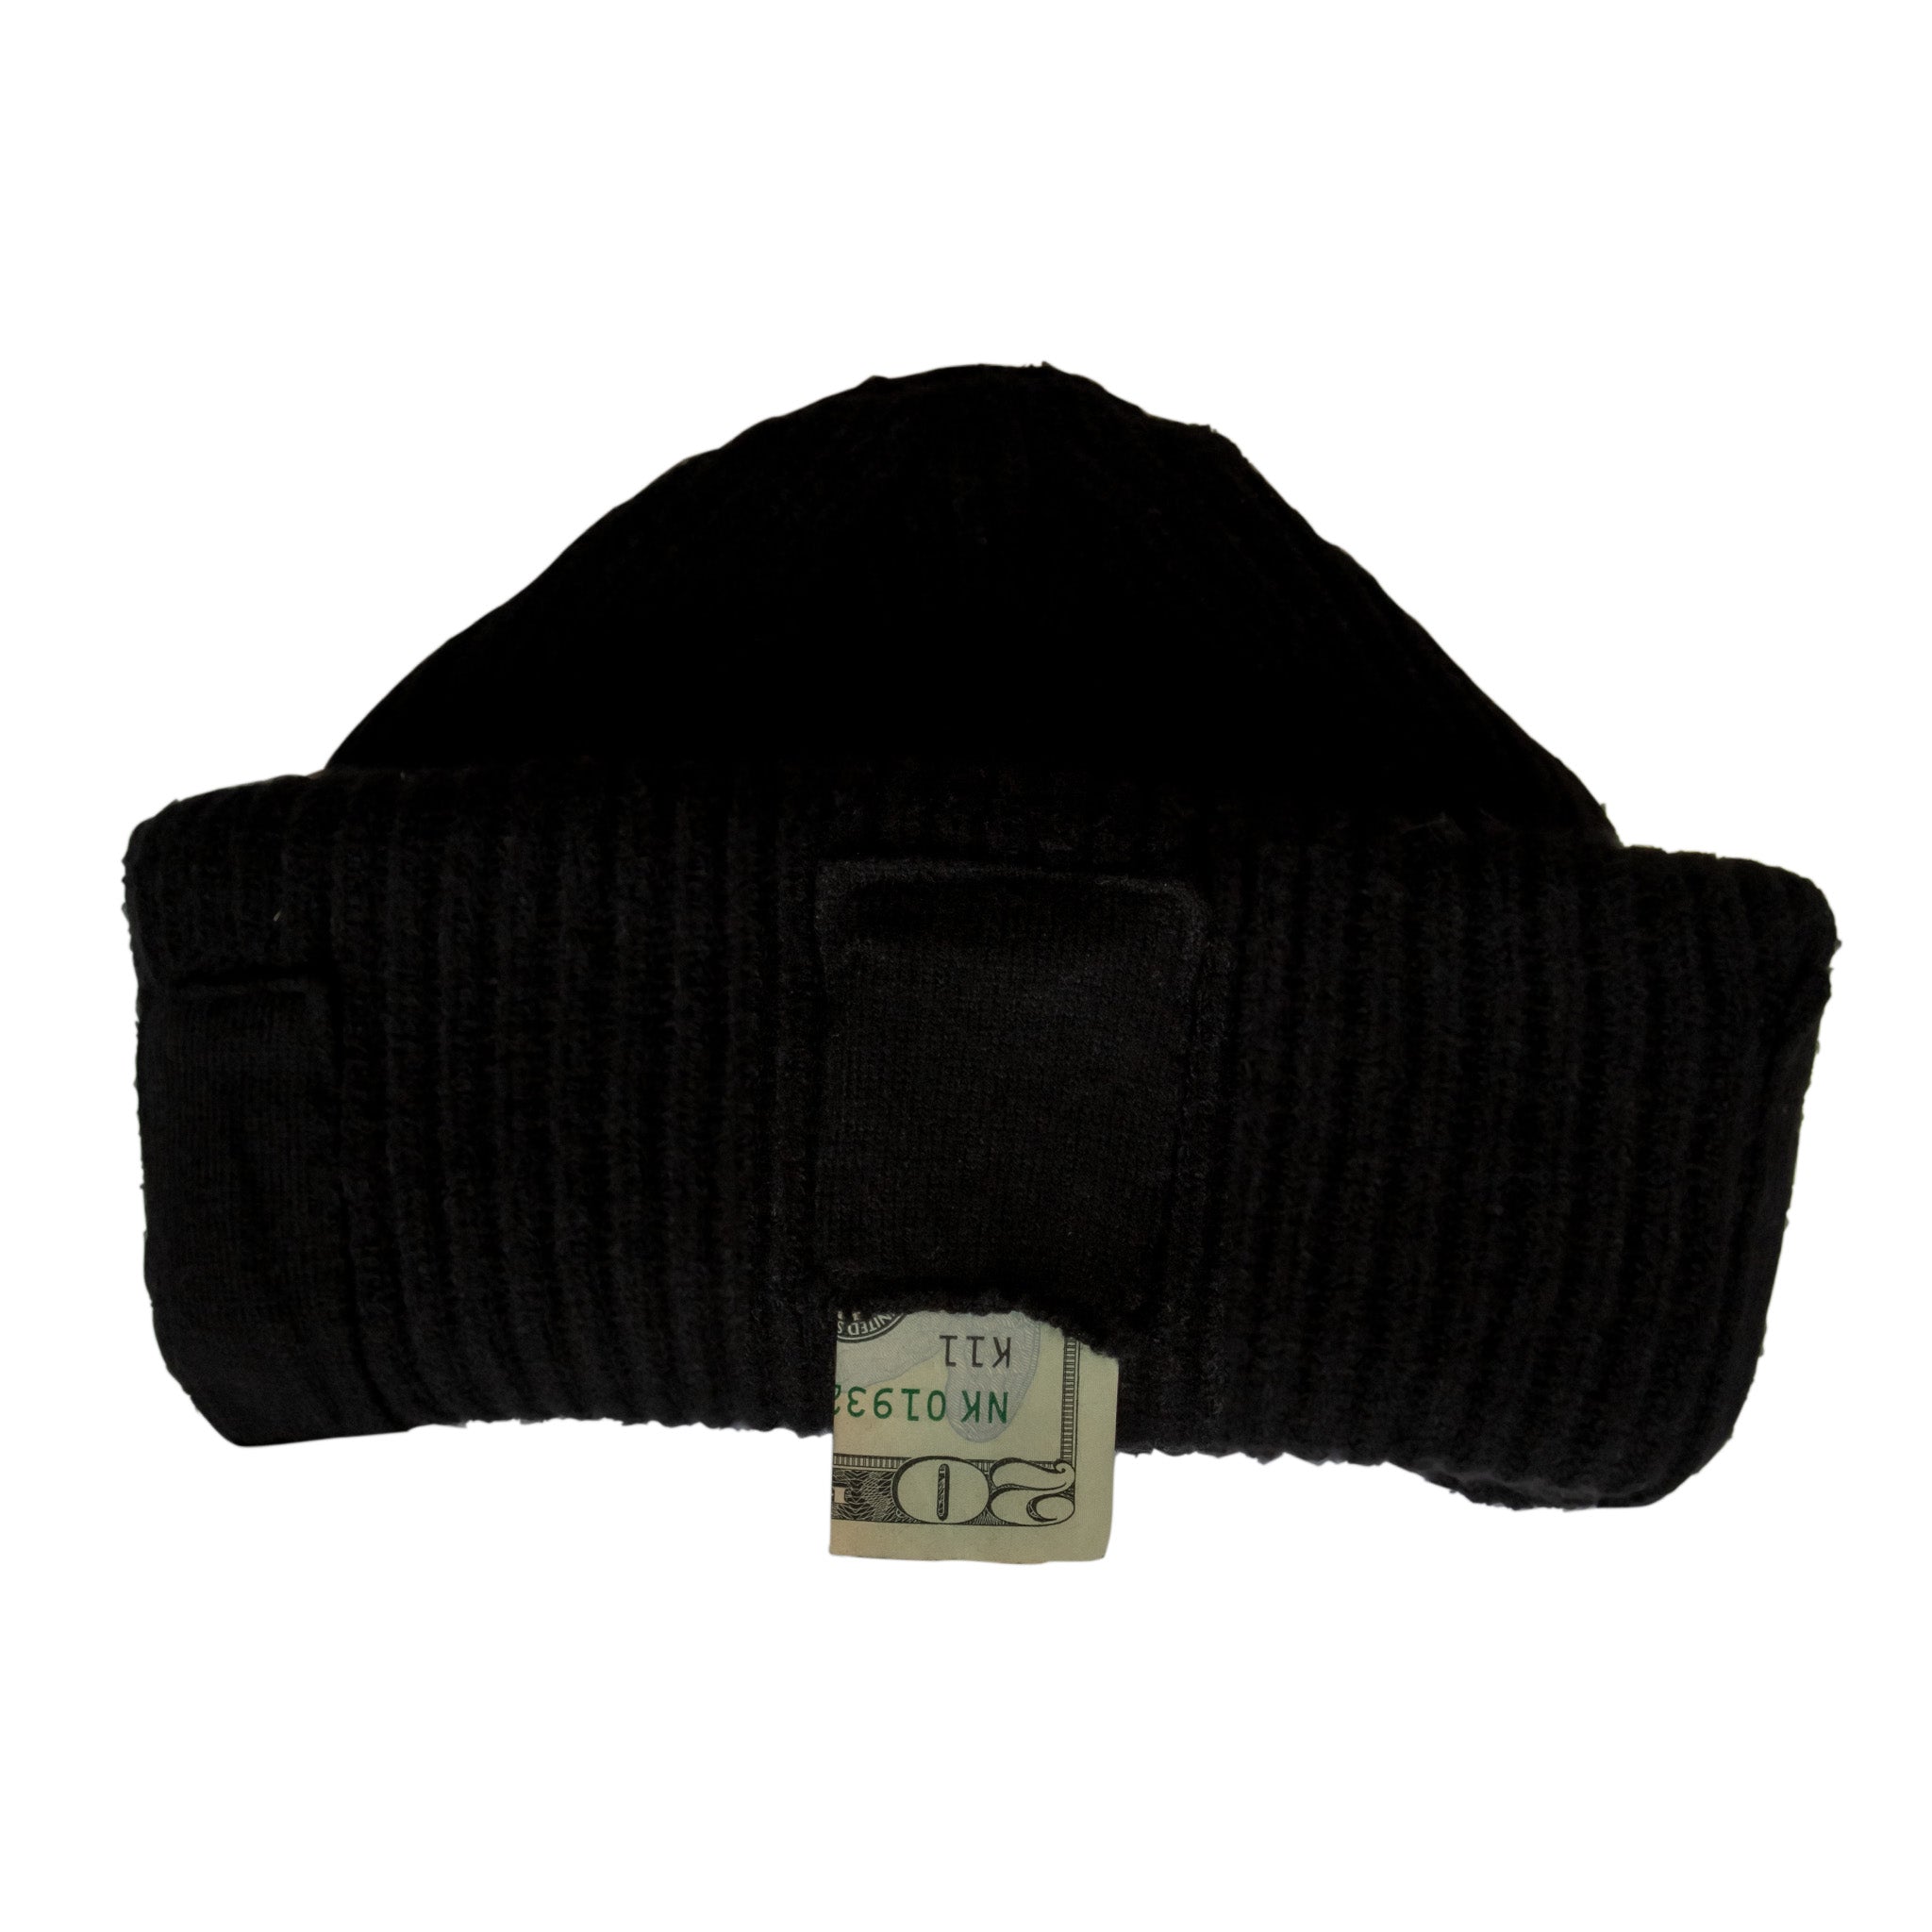 Side view of Shred Beanie showing small pocket holding a folded up 20 dollar bill.